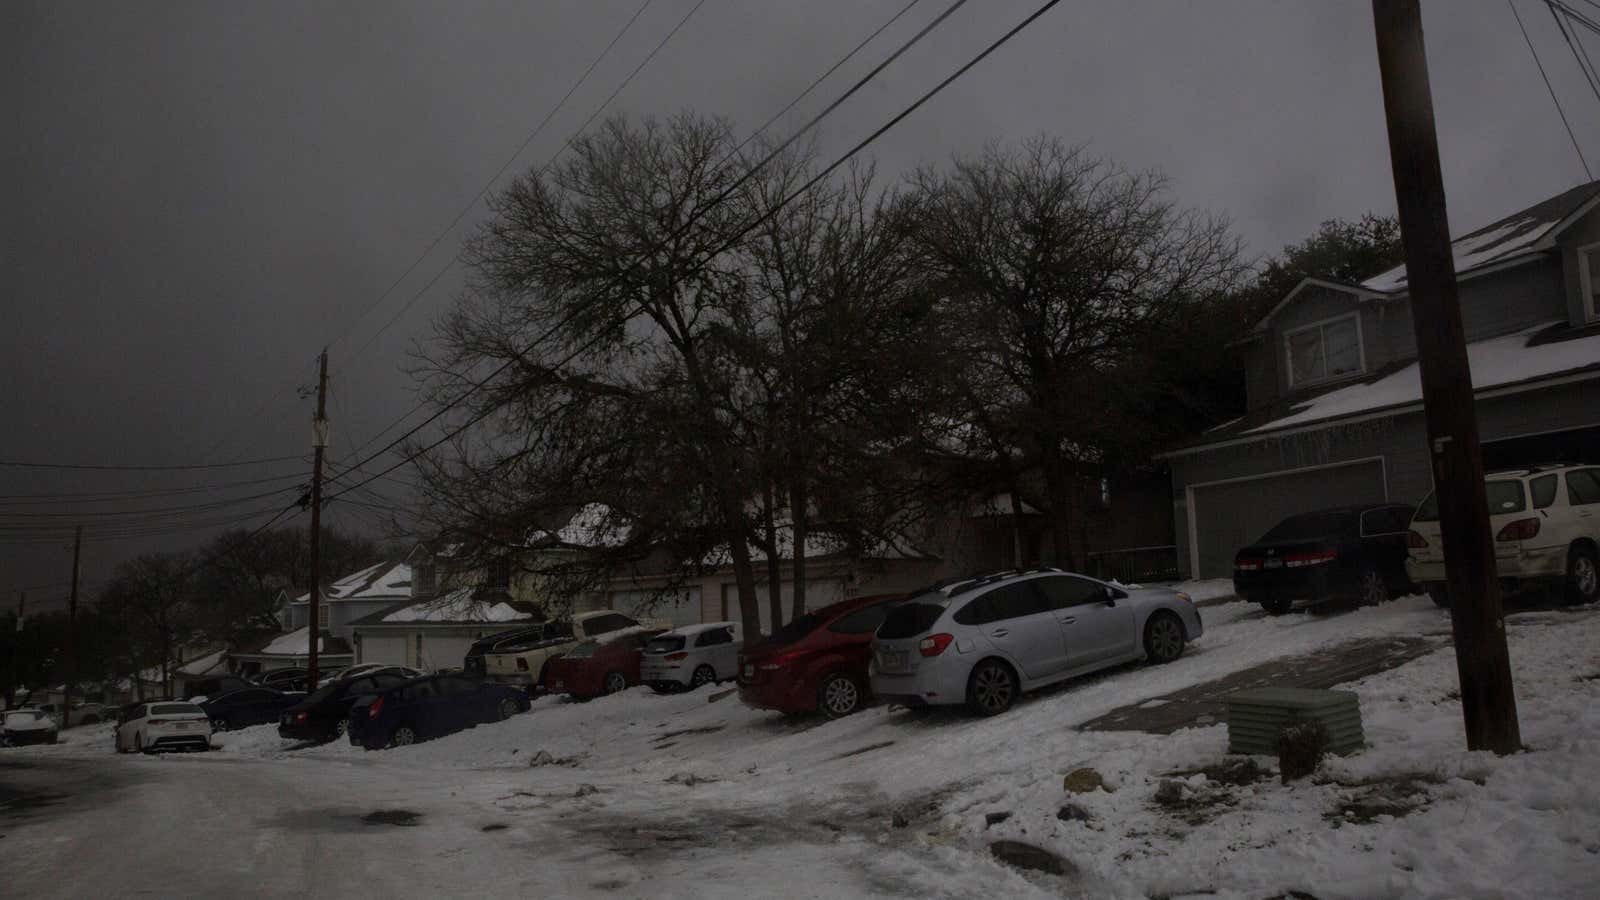 The costs of preventing another winter blackout in Texas are likely much lower than the benefits, a Dallas Fed analysis found.